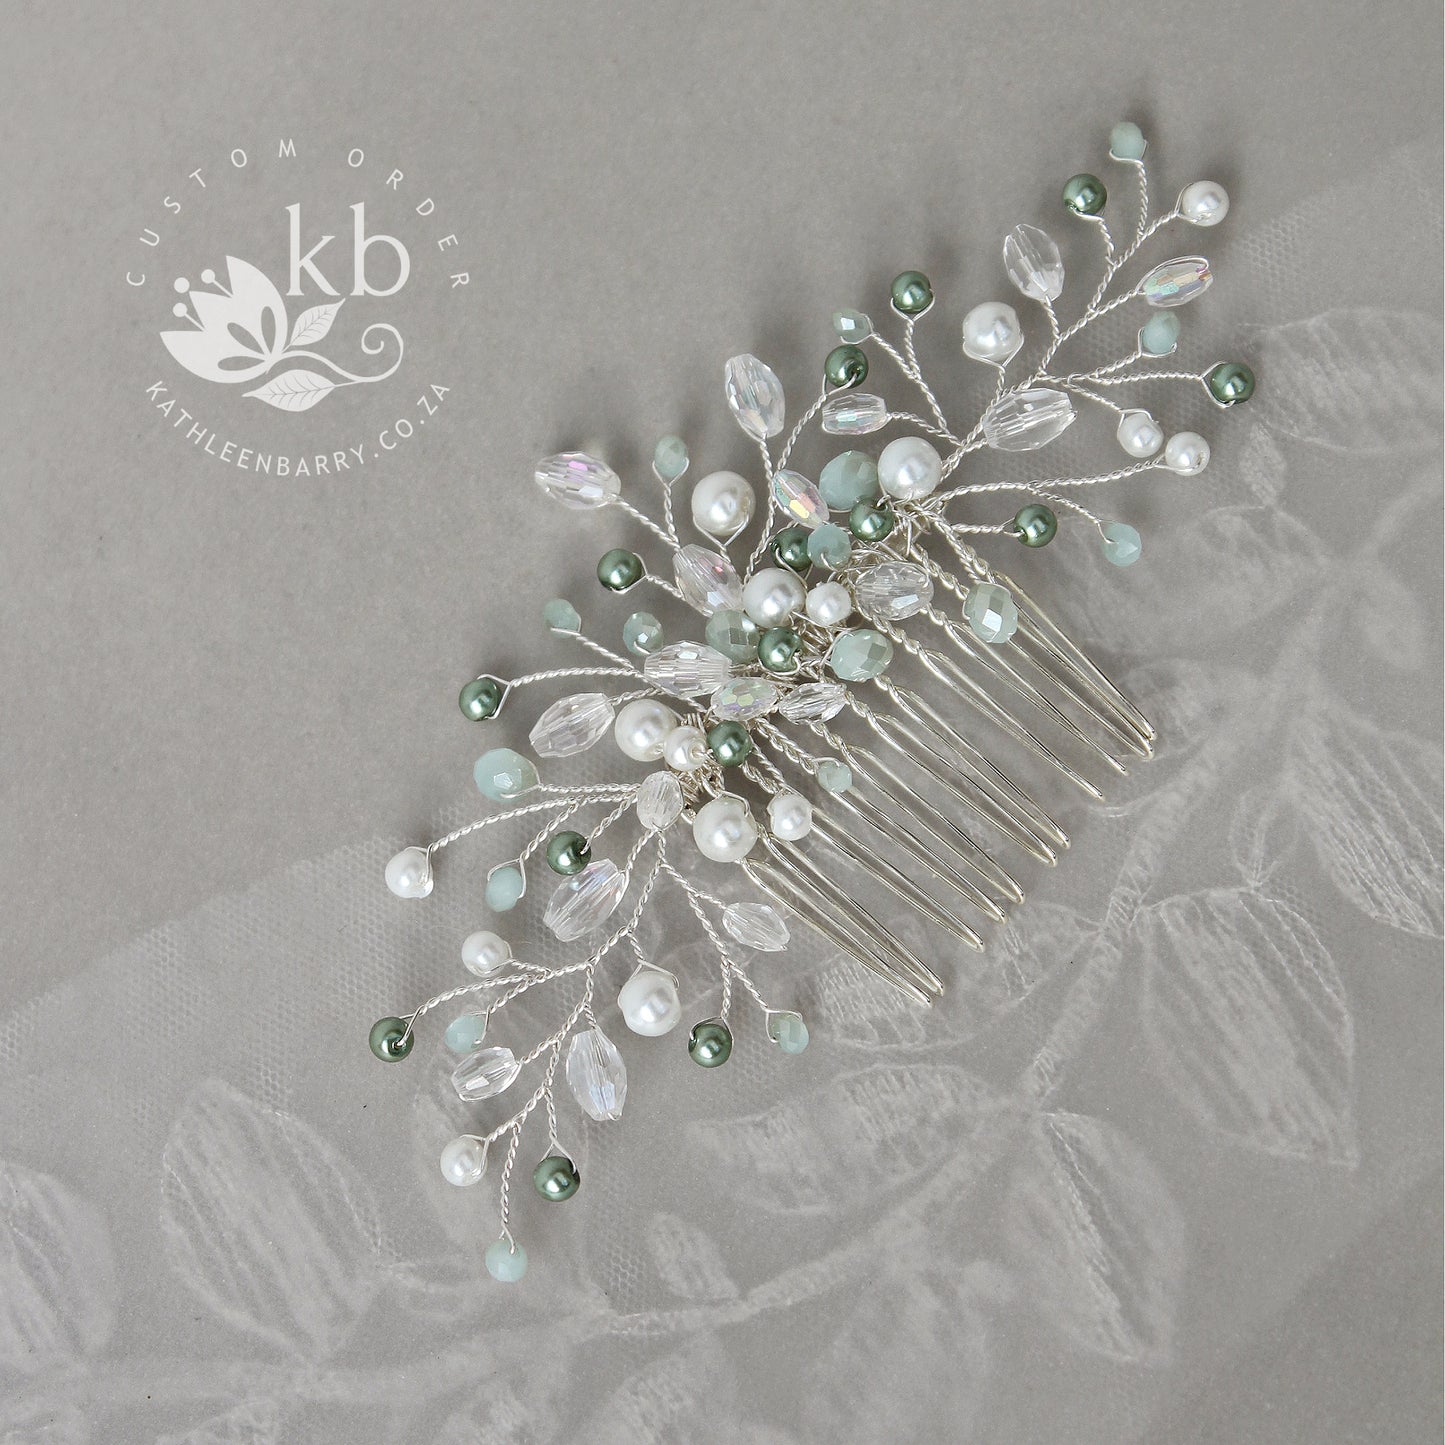 Willow Hairpiece comb - Crystal & Pearl colors to order - Silver, Gold or Rose gold options sage green etc